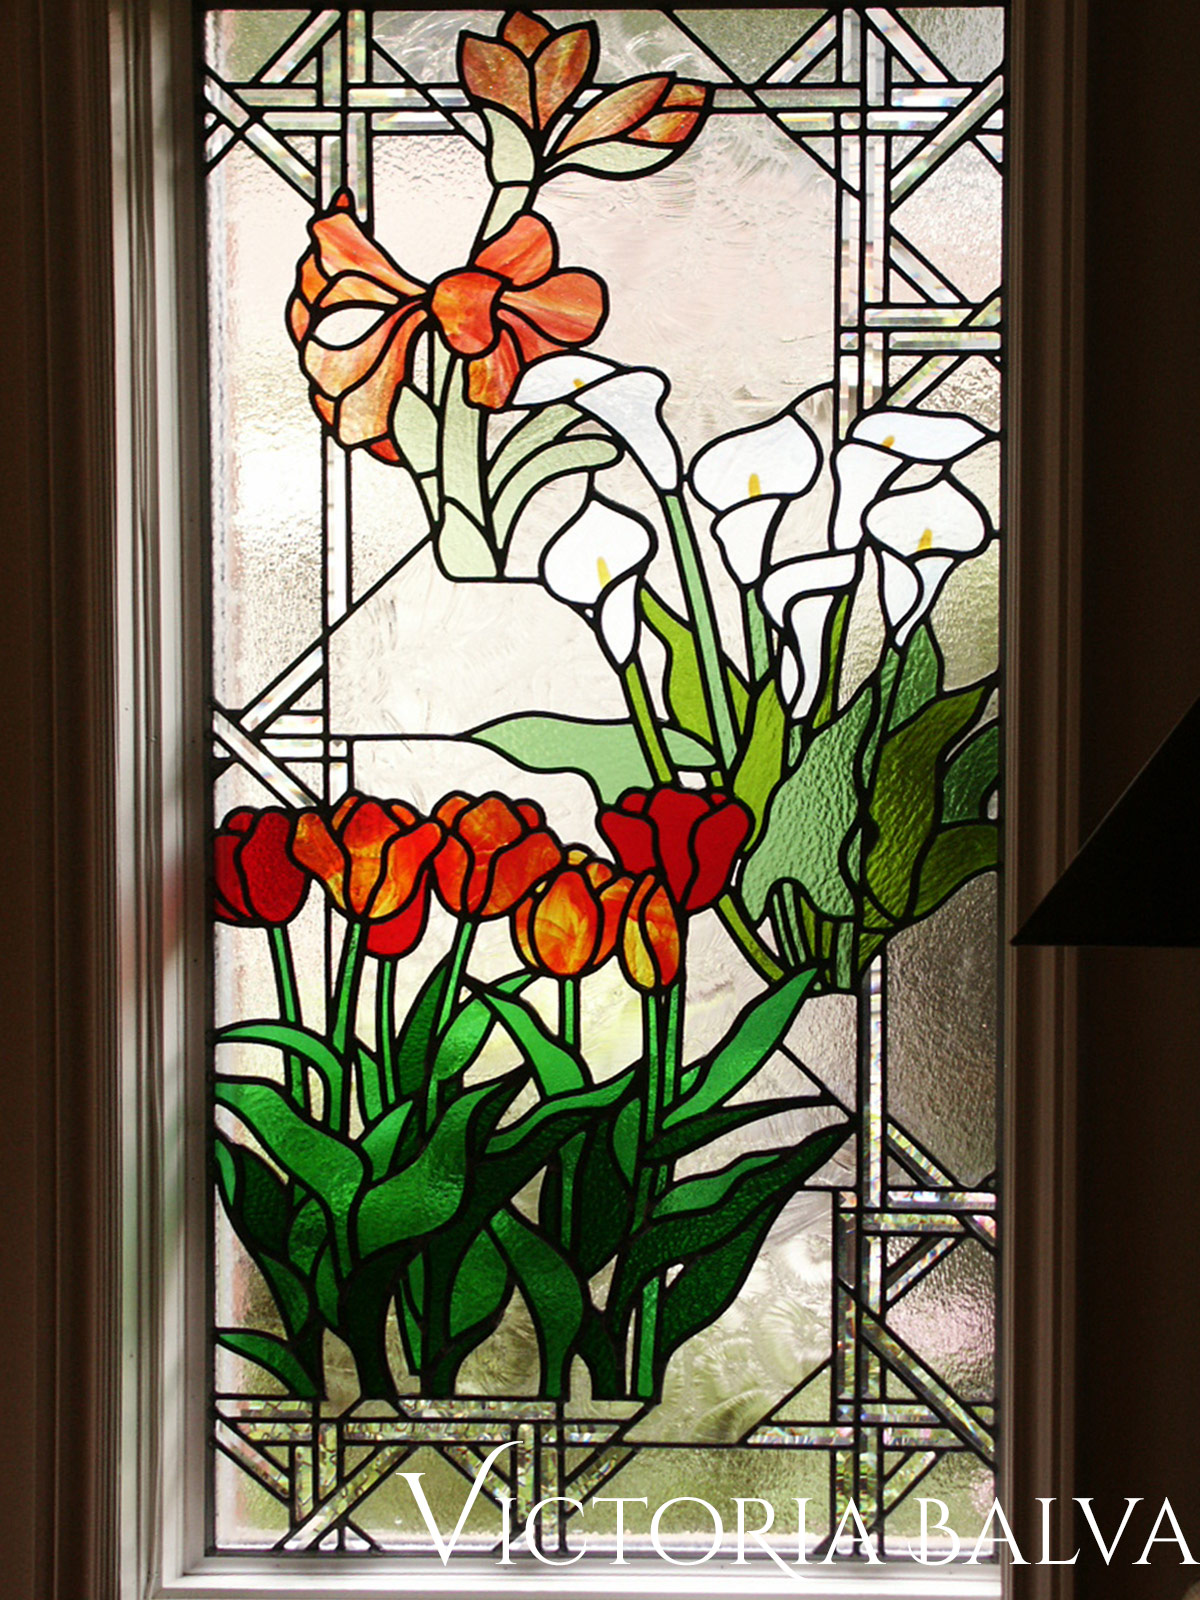 Stained leaded glass window. Flower garden. Amoralis, Tulips, Lilias. Overall view of the window